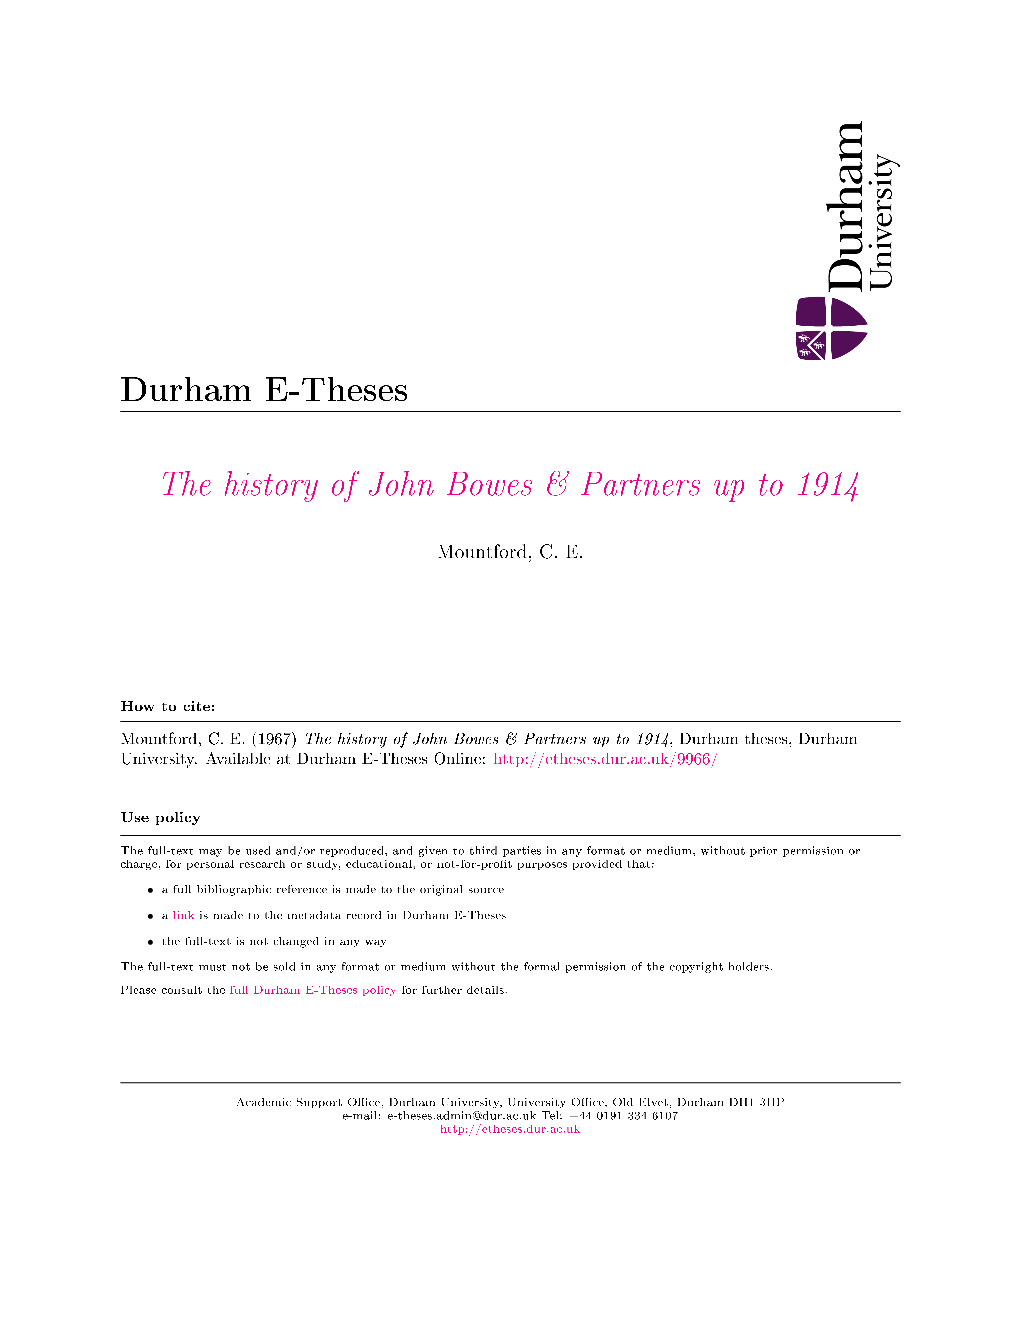 The History of John Bowes & Partners up to 1914